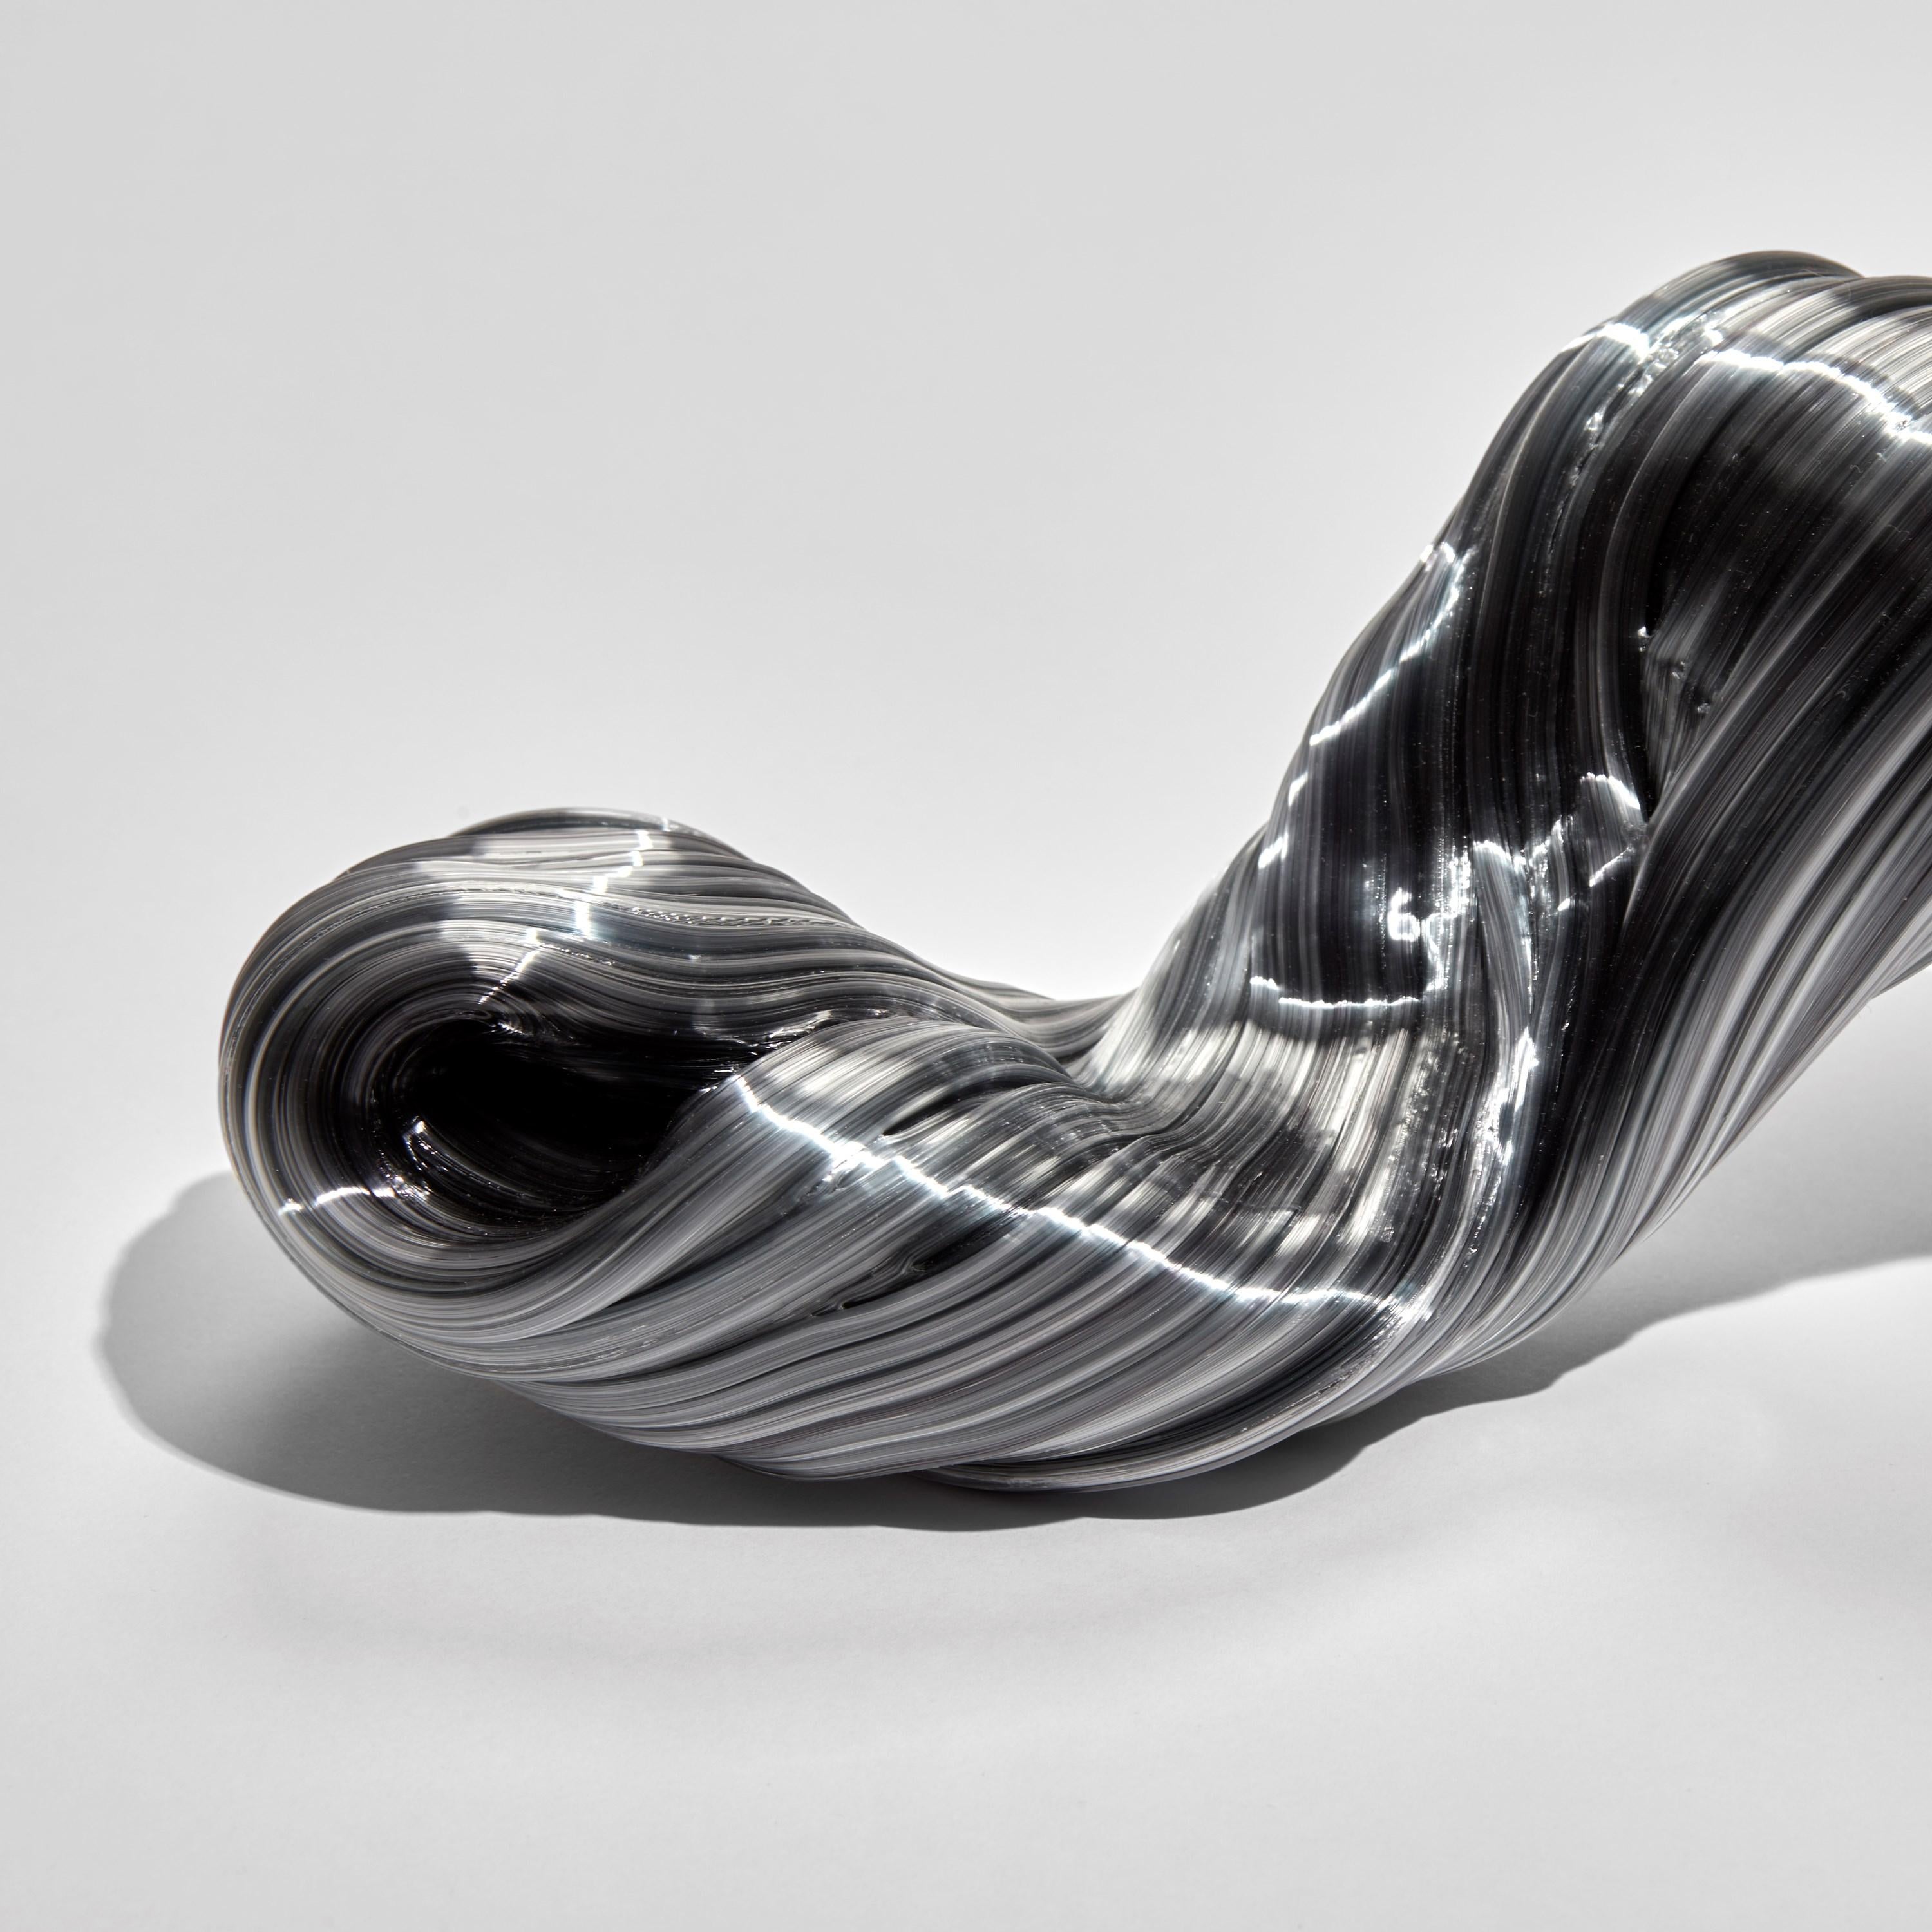 Organic Modern Nonlinear in Black, a Unique Abstract Glass Sculpture by Maria Bang Espersen For Sale